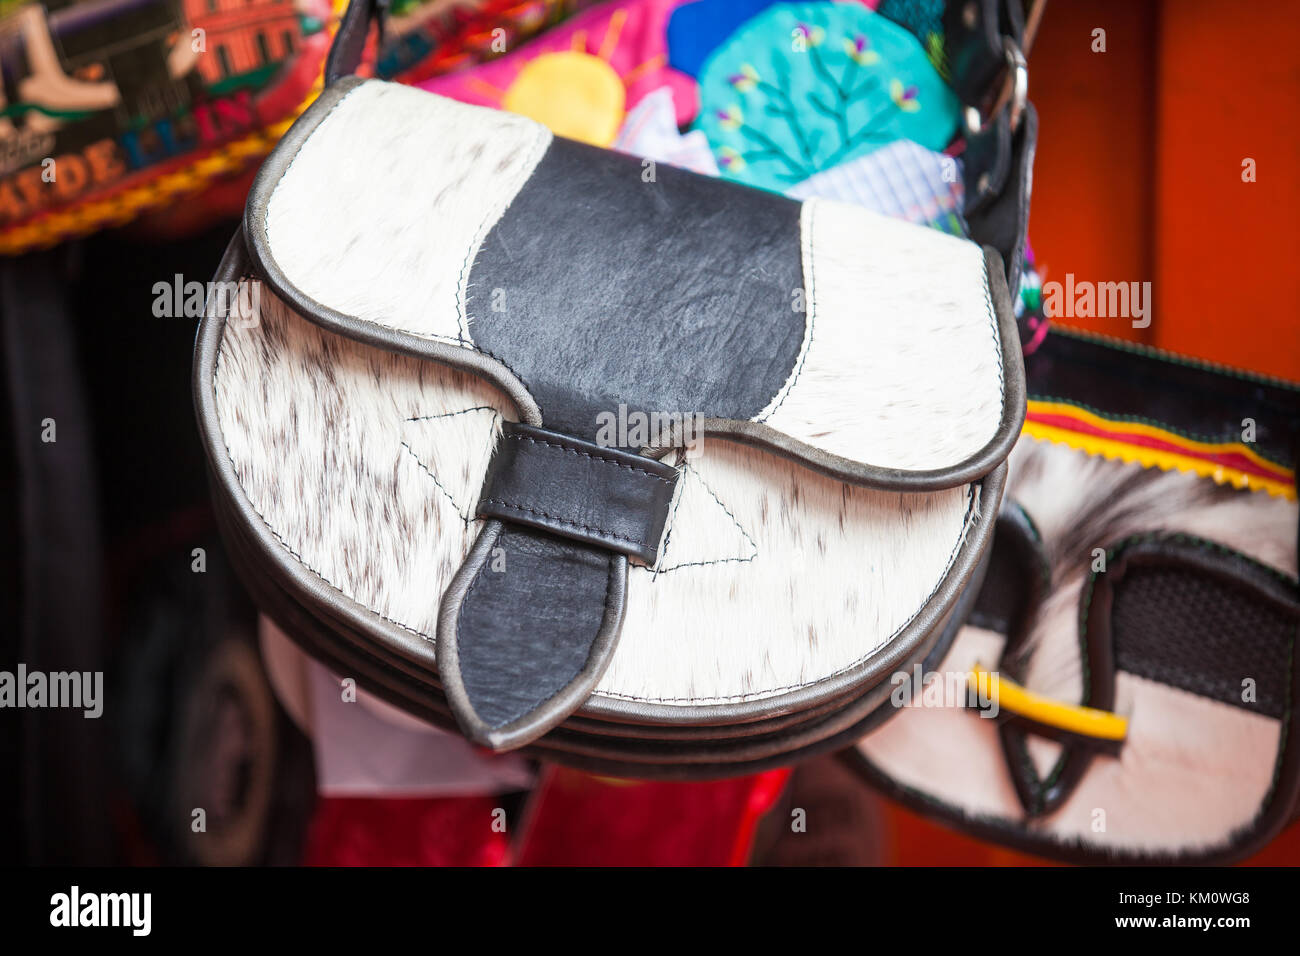 Colombian traditional leather satchel from the Antioquia Region called Carriel Stock Photo